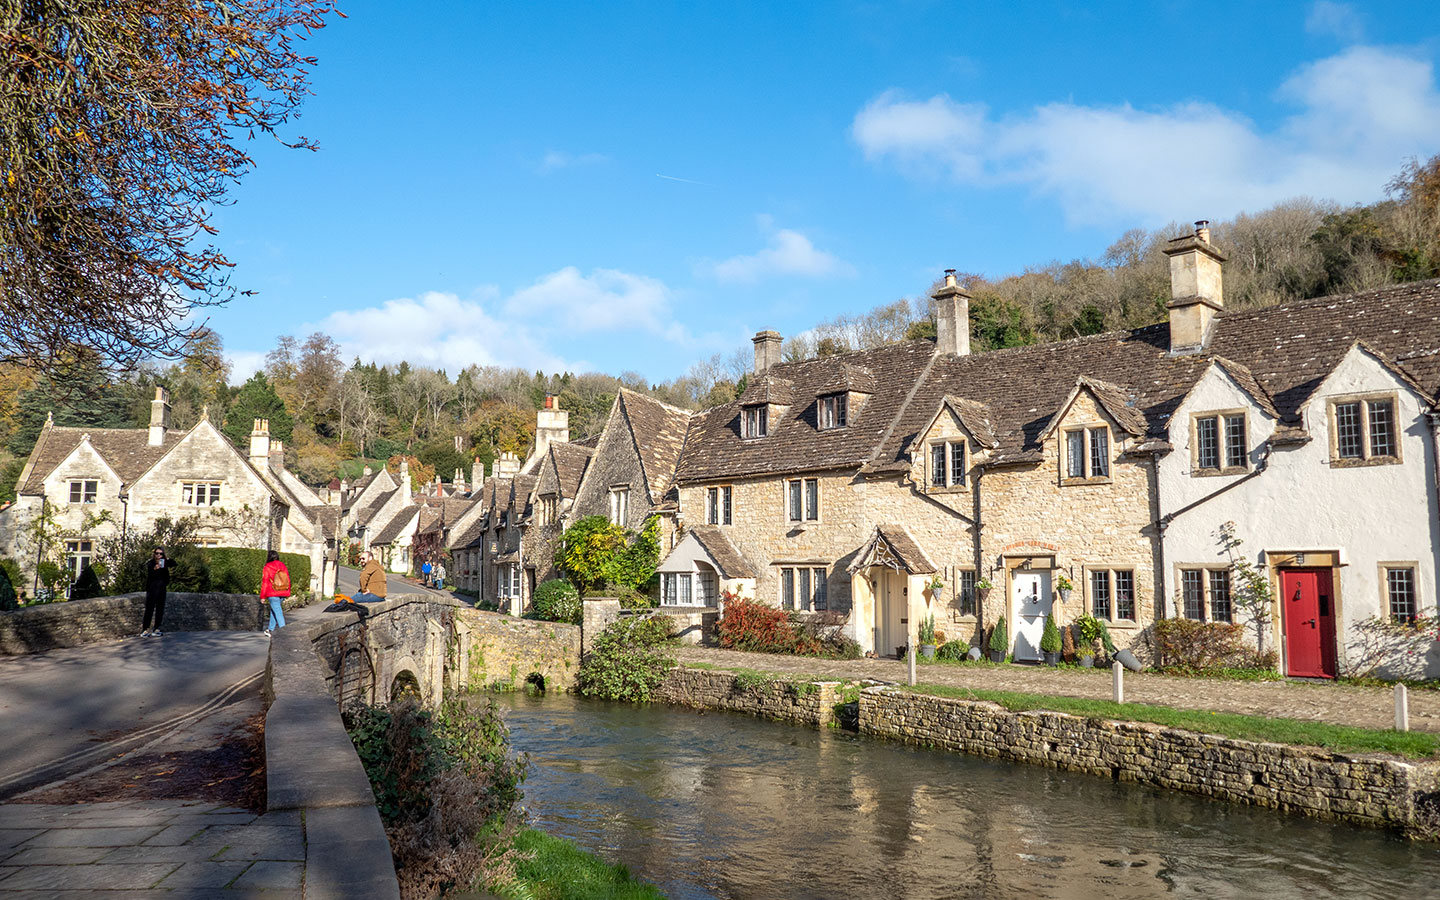 Castle Combe, one of the prettiest villages in the Cotswolds